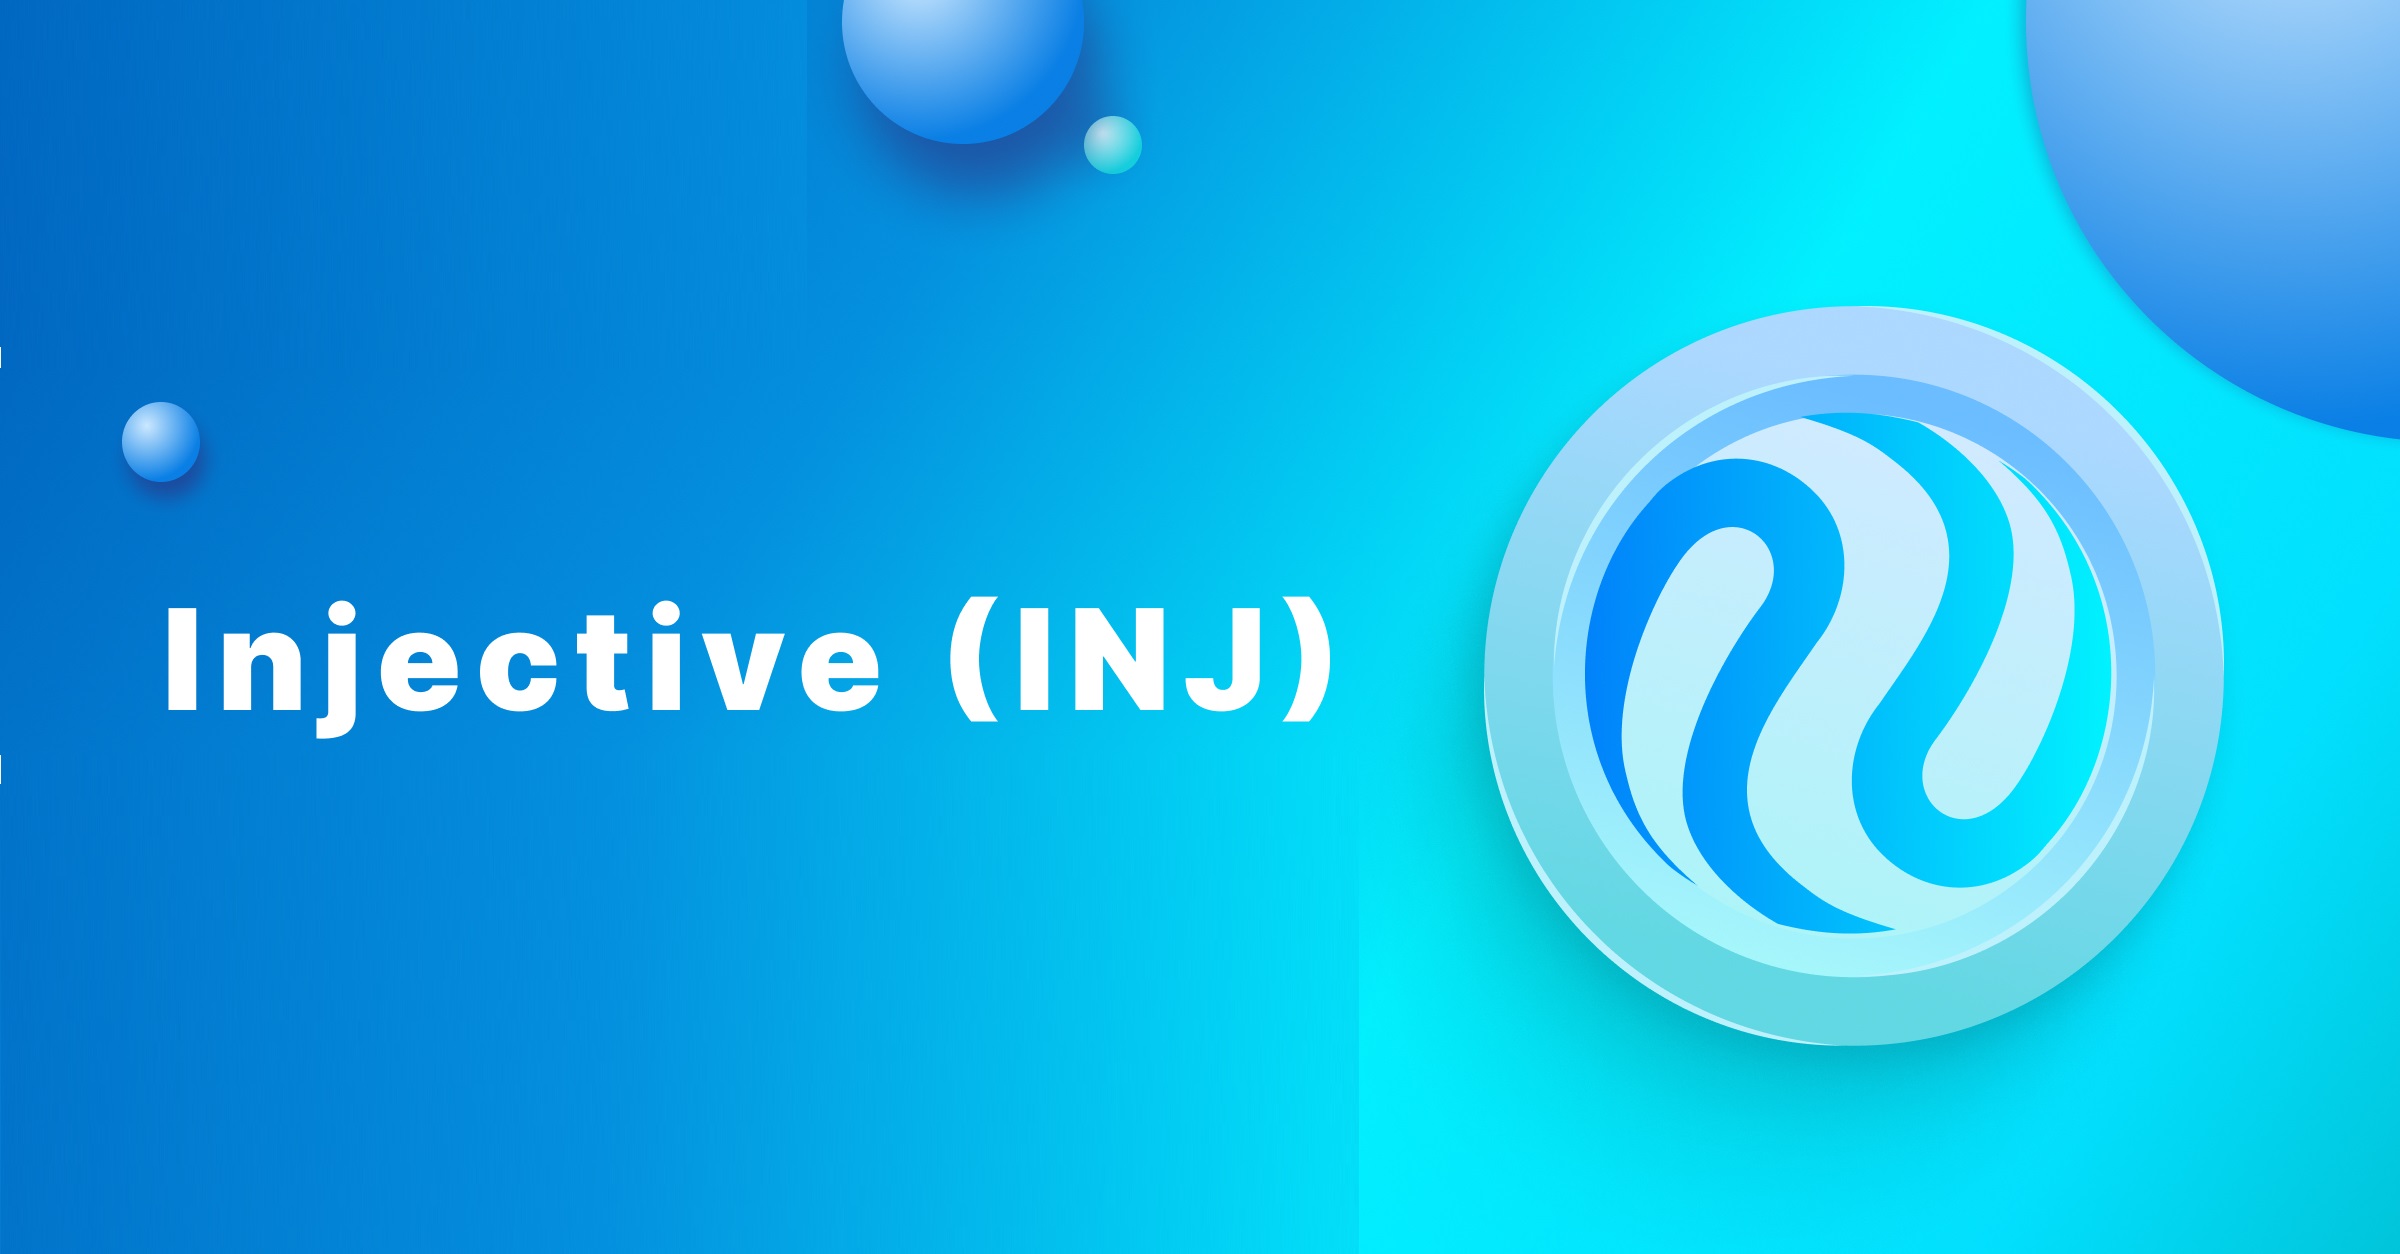 Injective Protocol Coin $INJ Aiming For Daily Target at $100